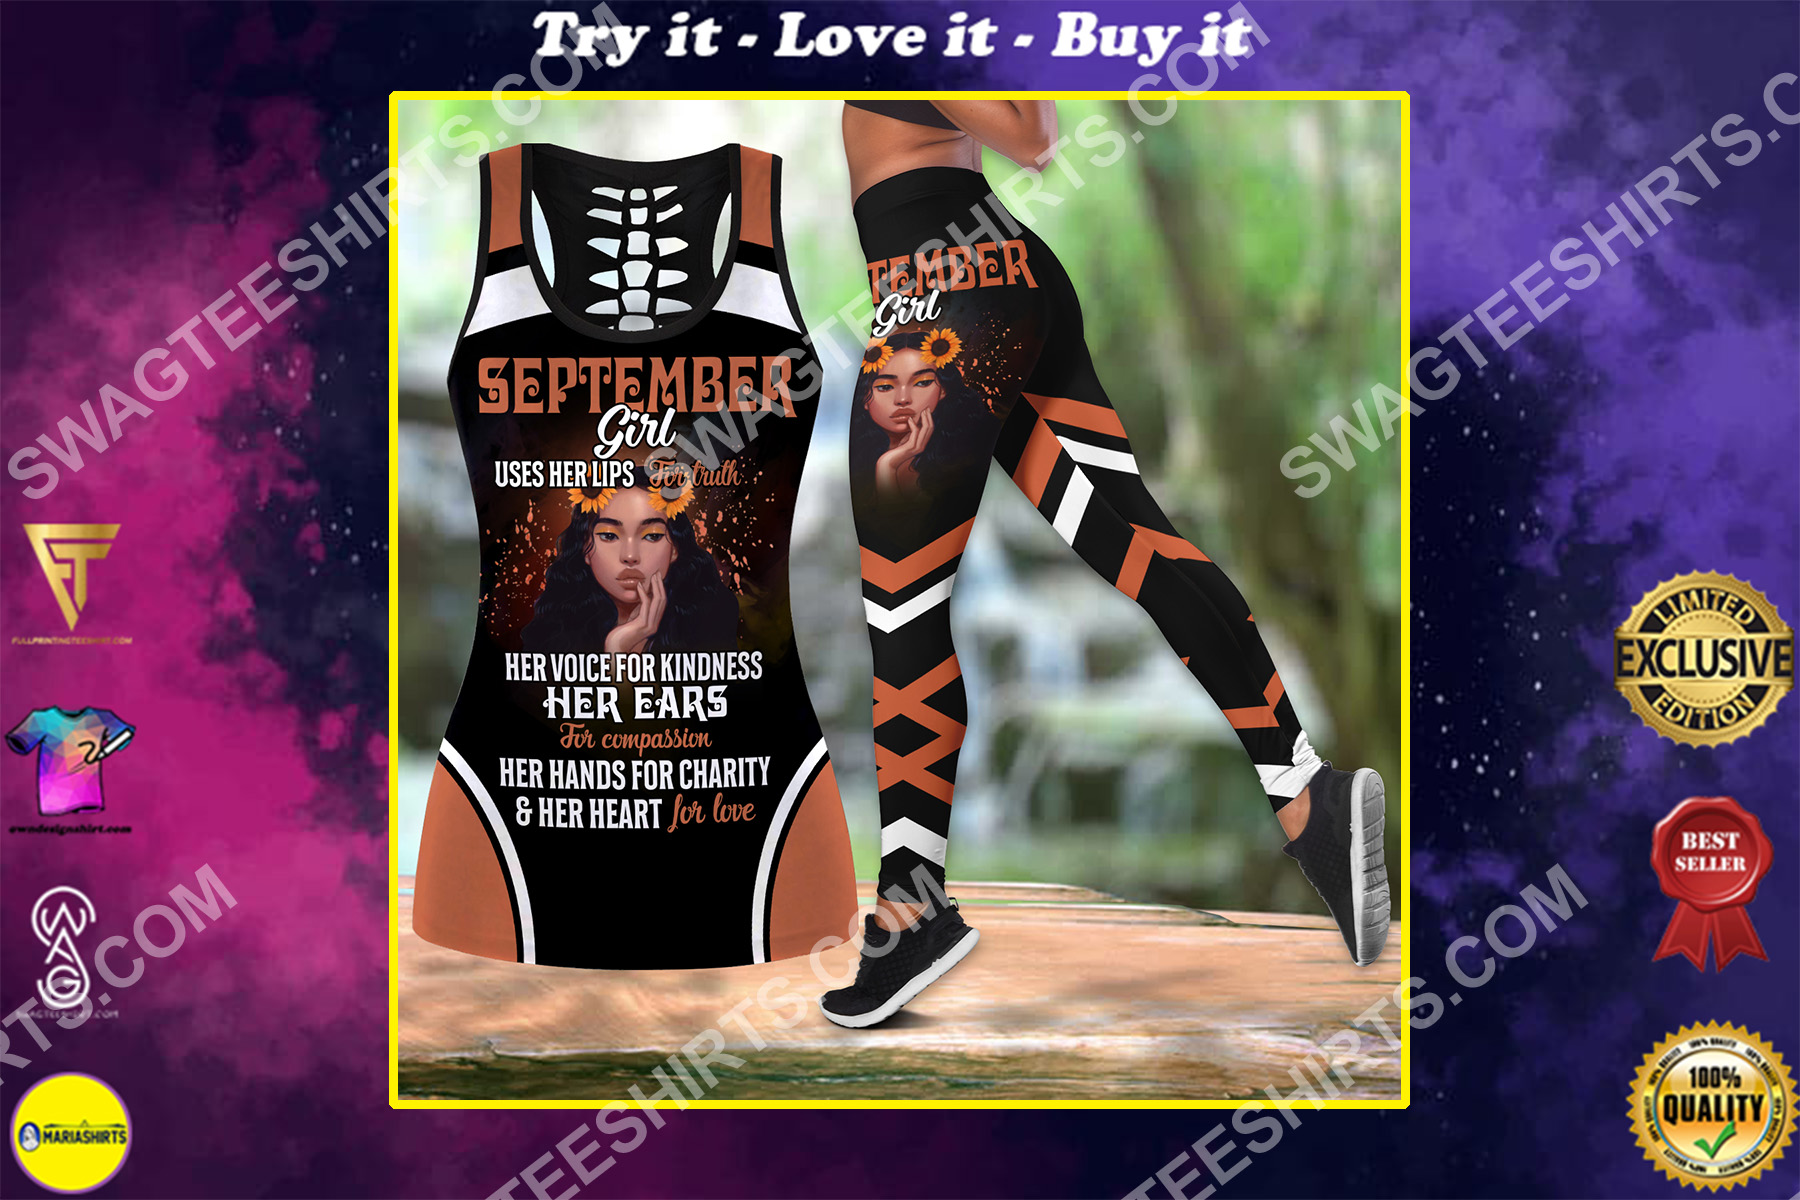 september girl uses her lips for truth birthday gift set sports outfit